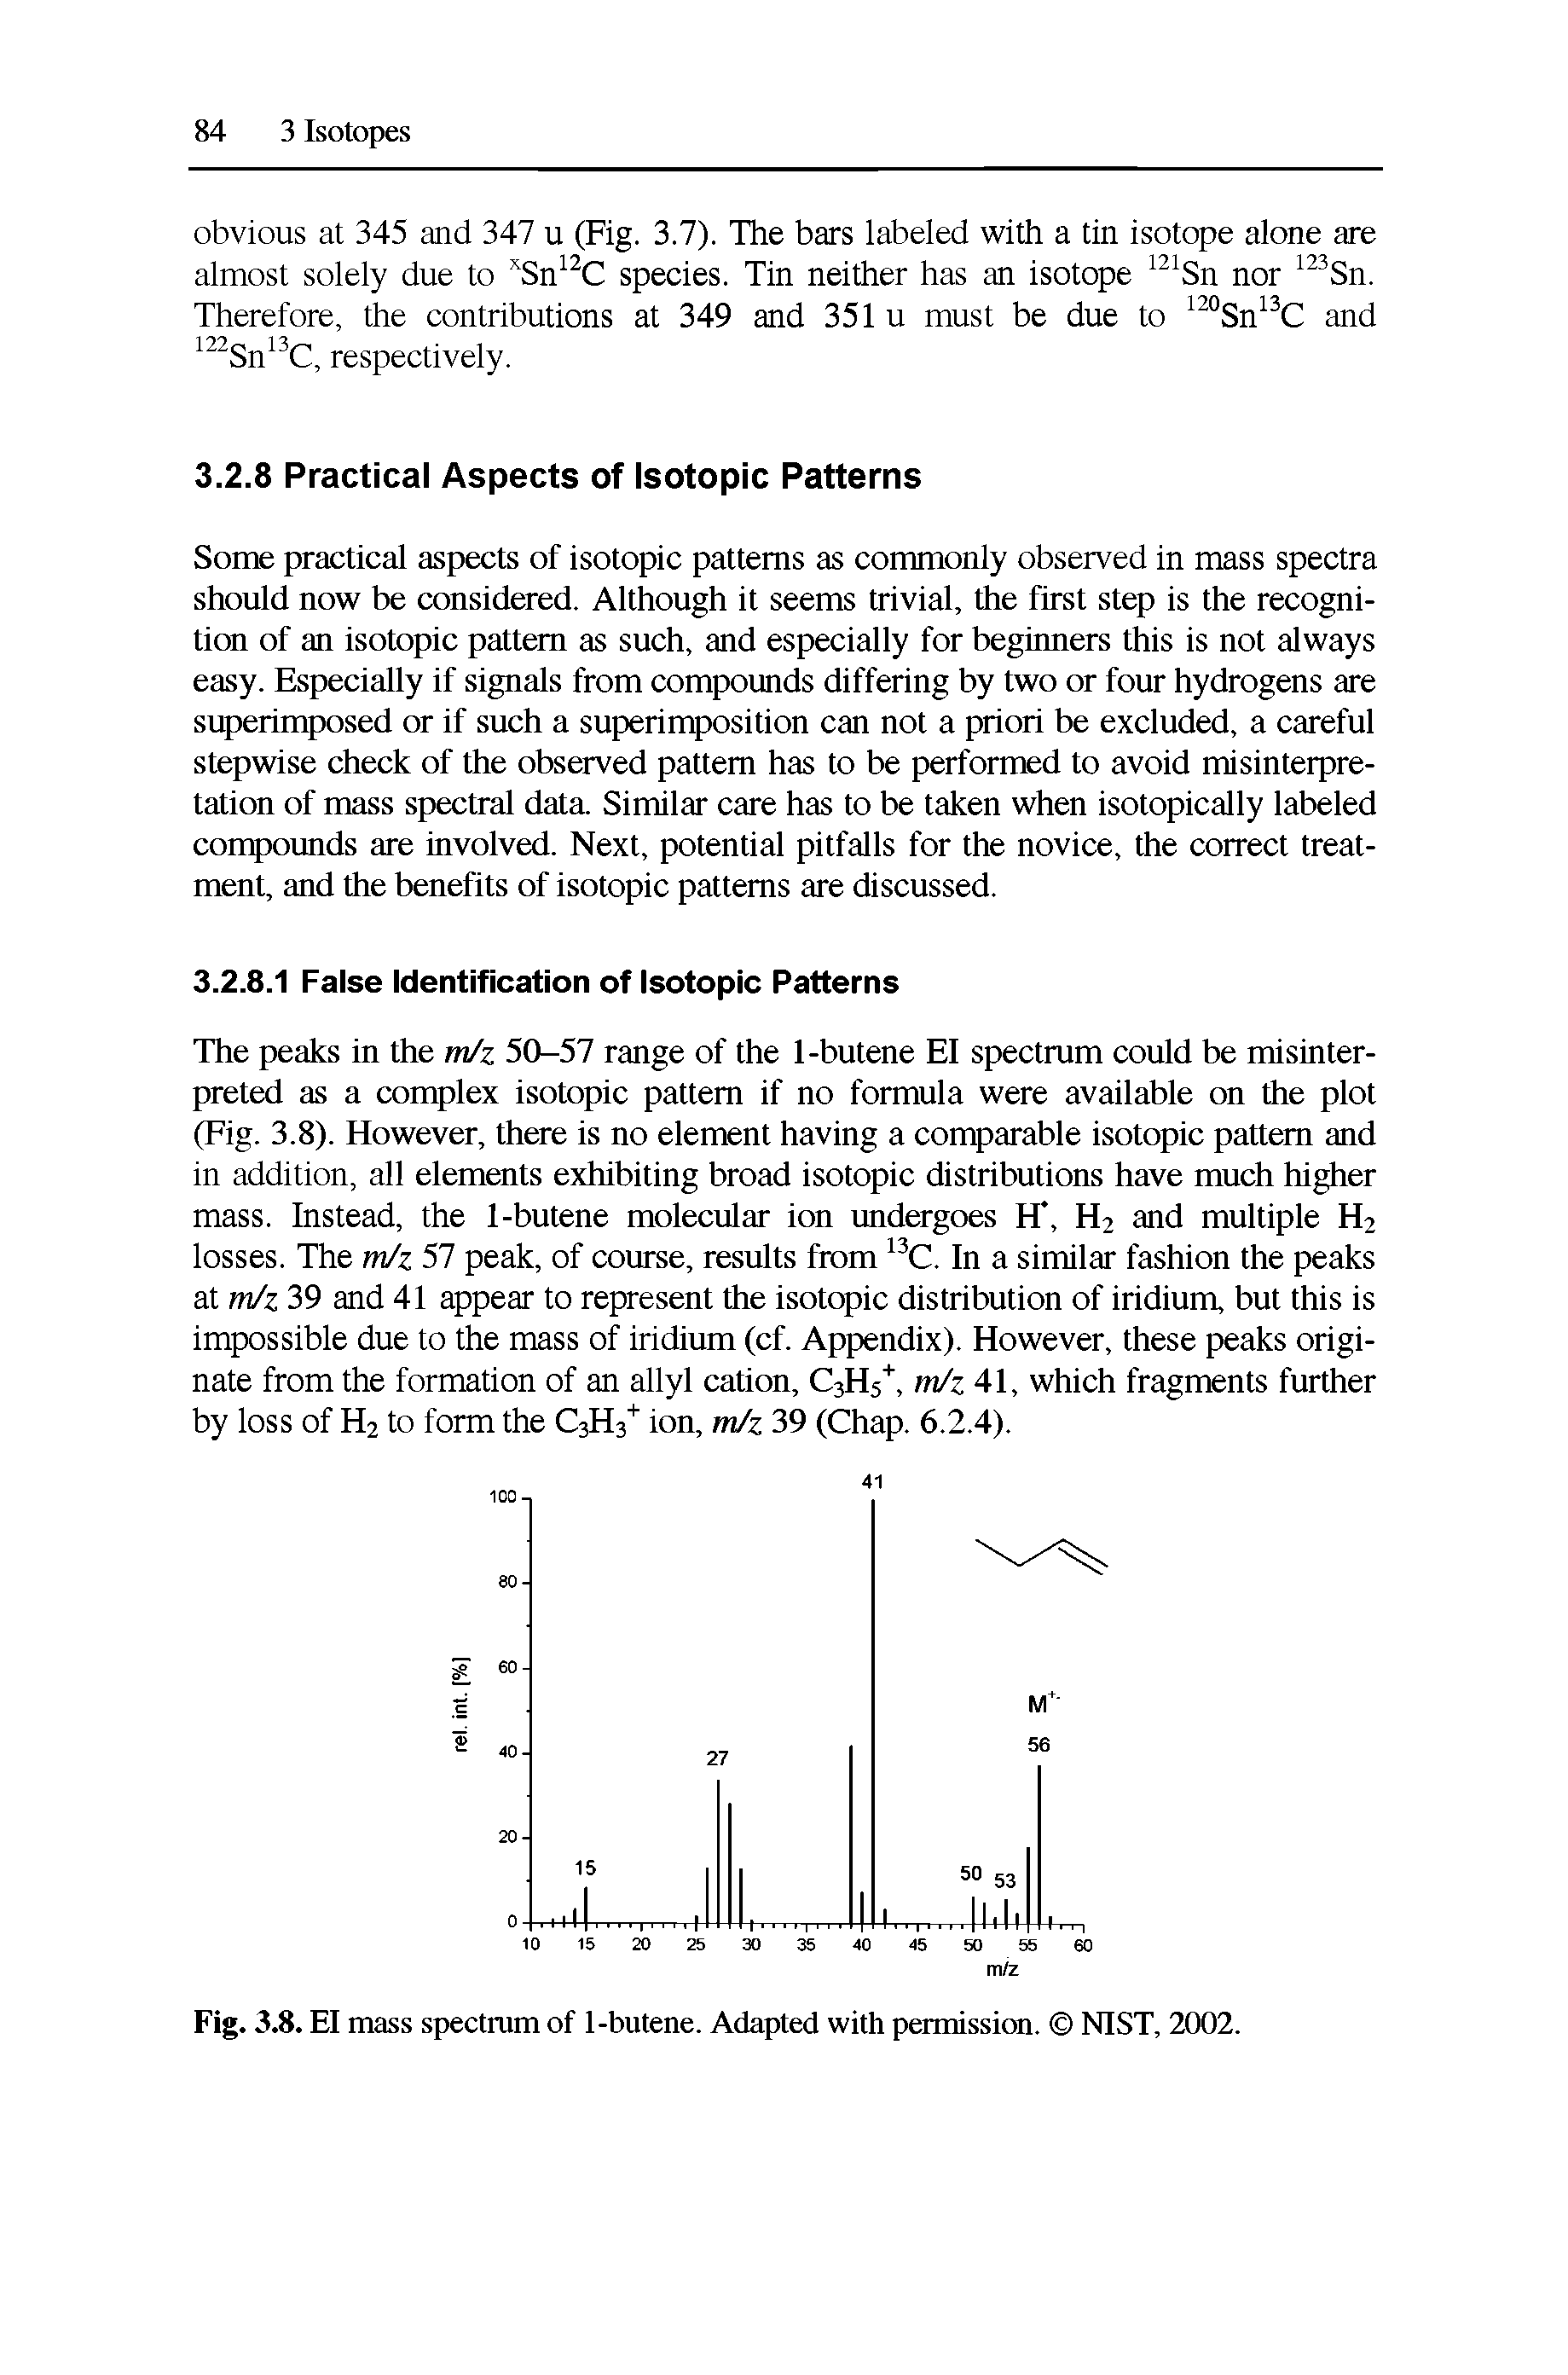 Fig. 3.8. El mass spectrum of 1-butene. Adapted with permission. NIST, 2002.